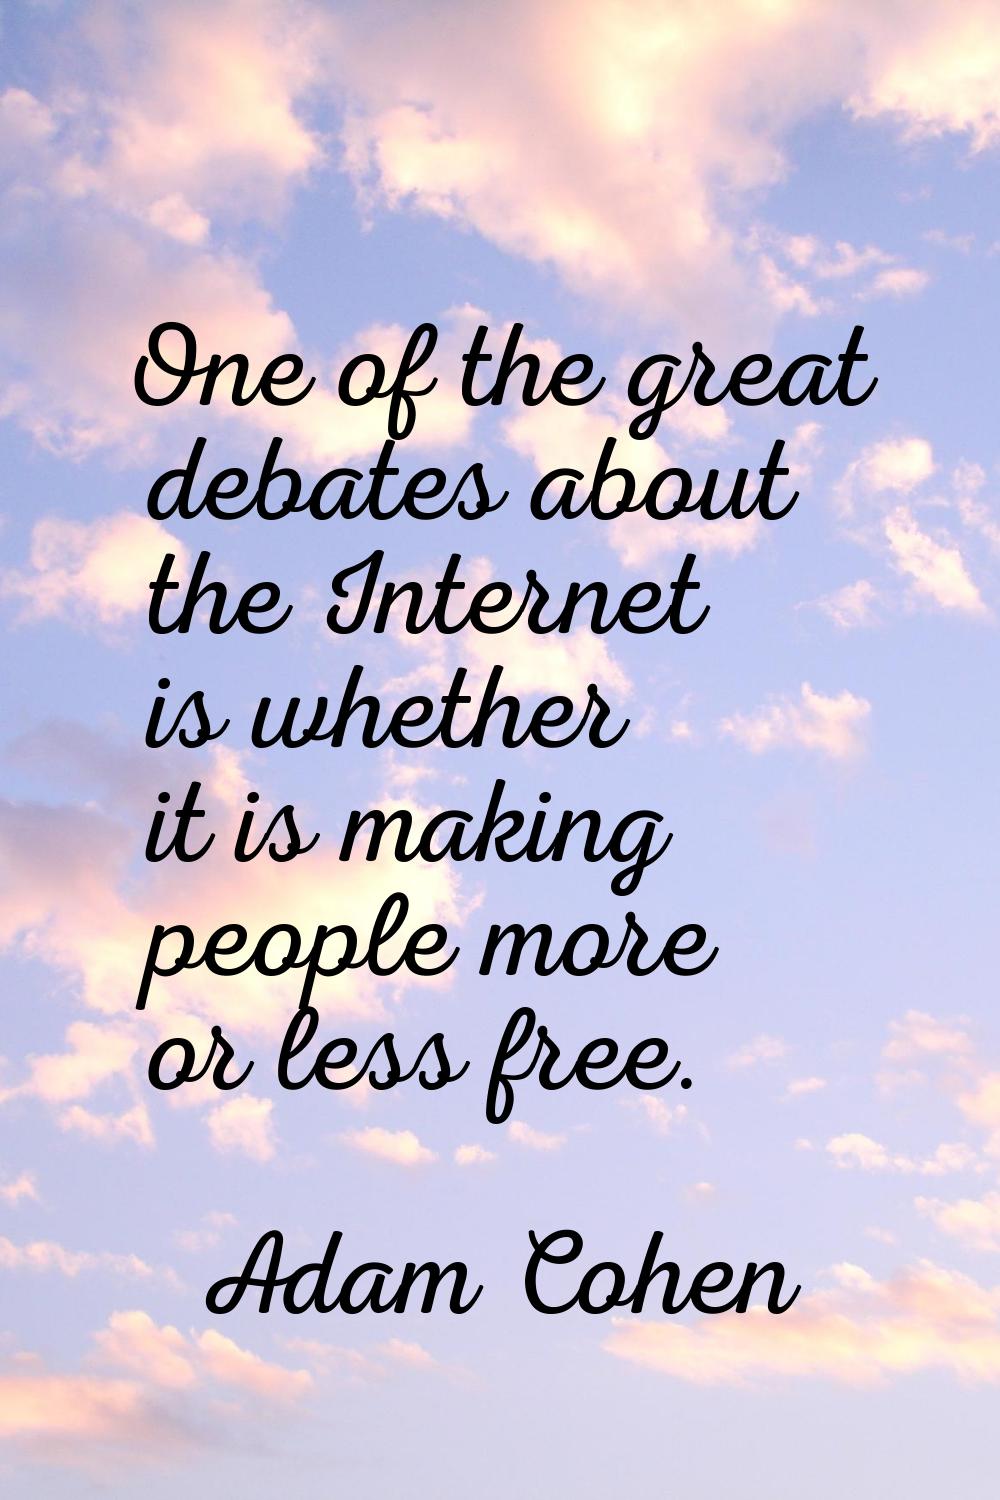 One of the great debates about the Internet is whether it is making people more or less free.